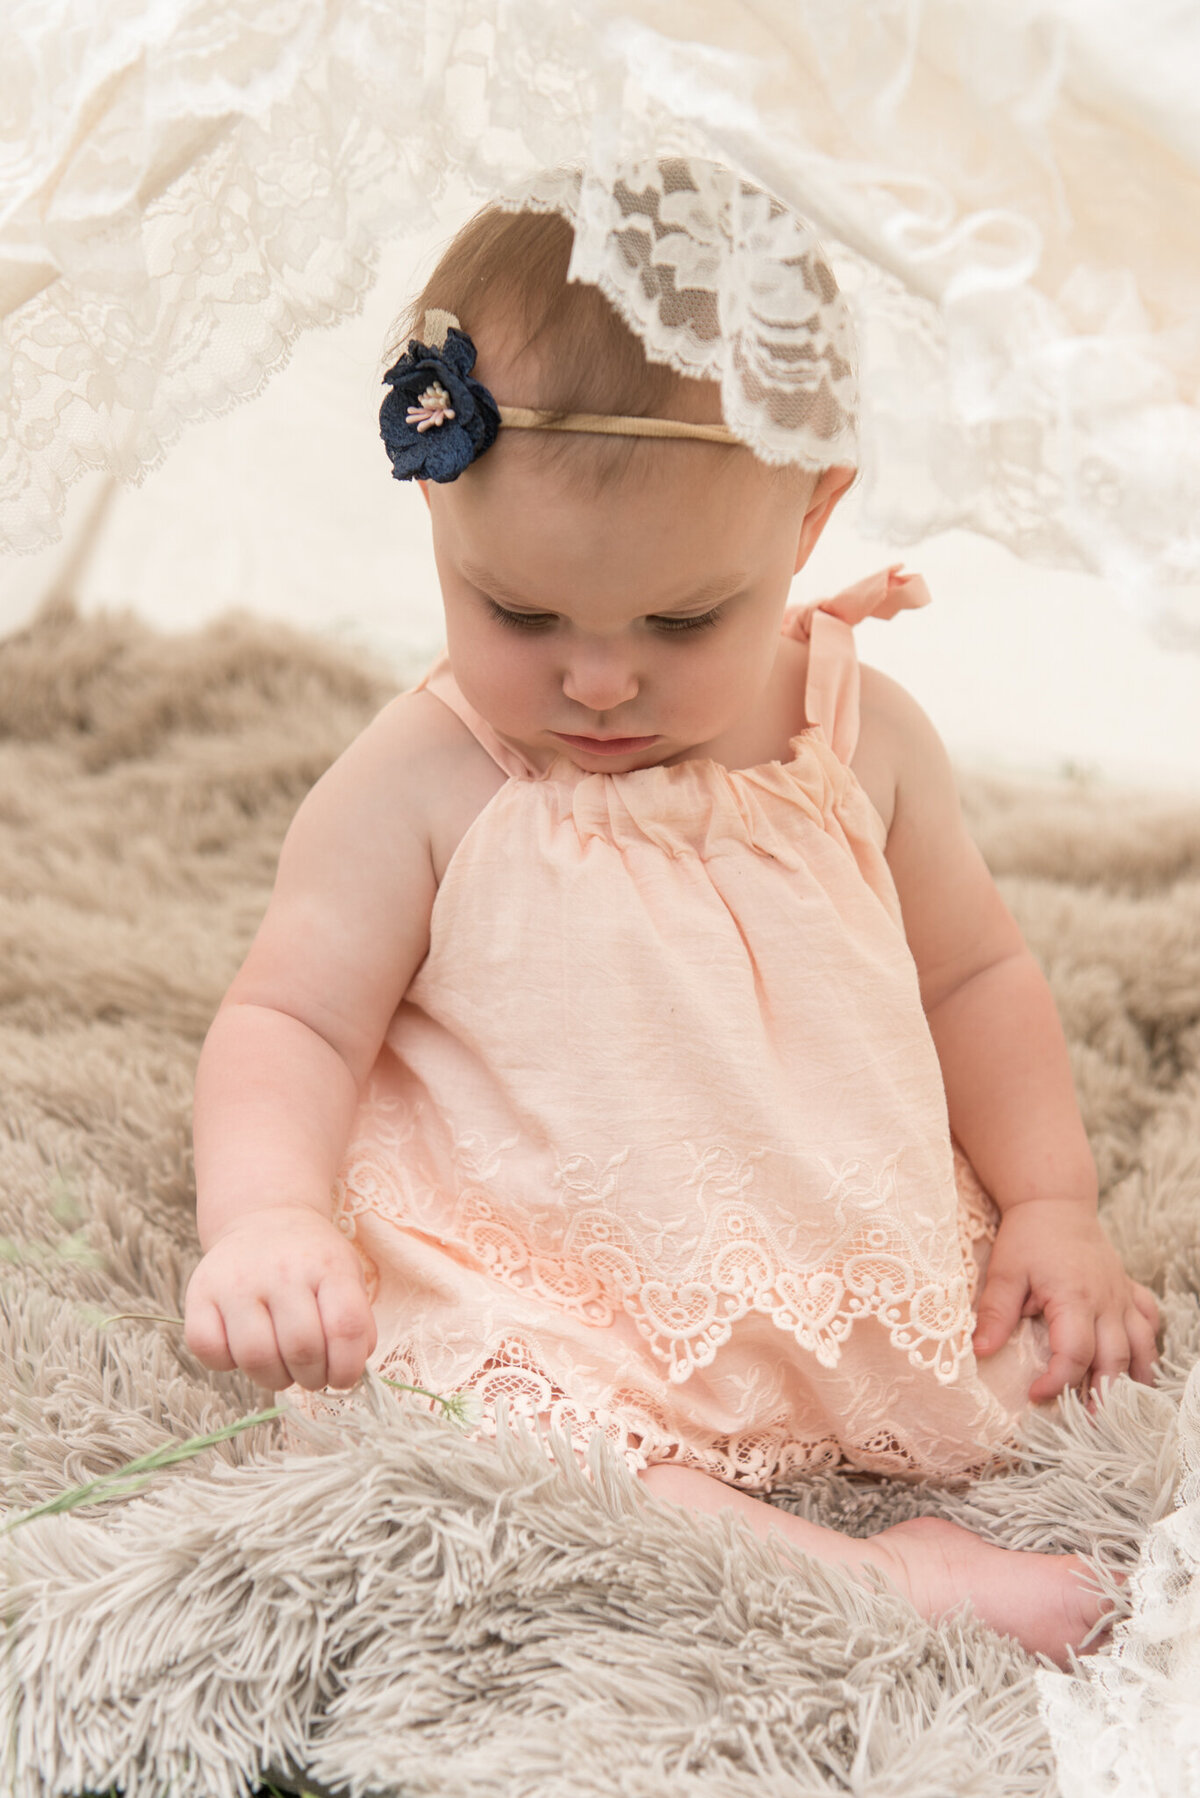 Little girl sitting in lace tent with blue headband and light pink romper